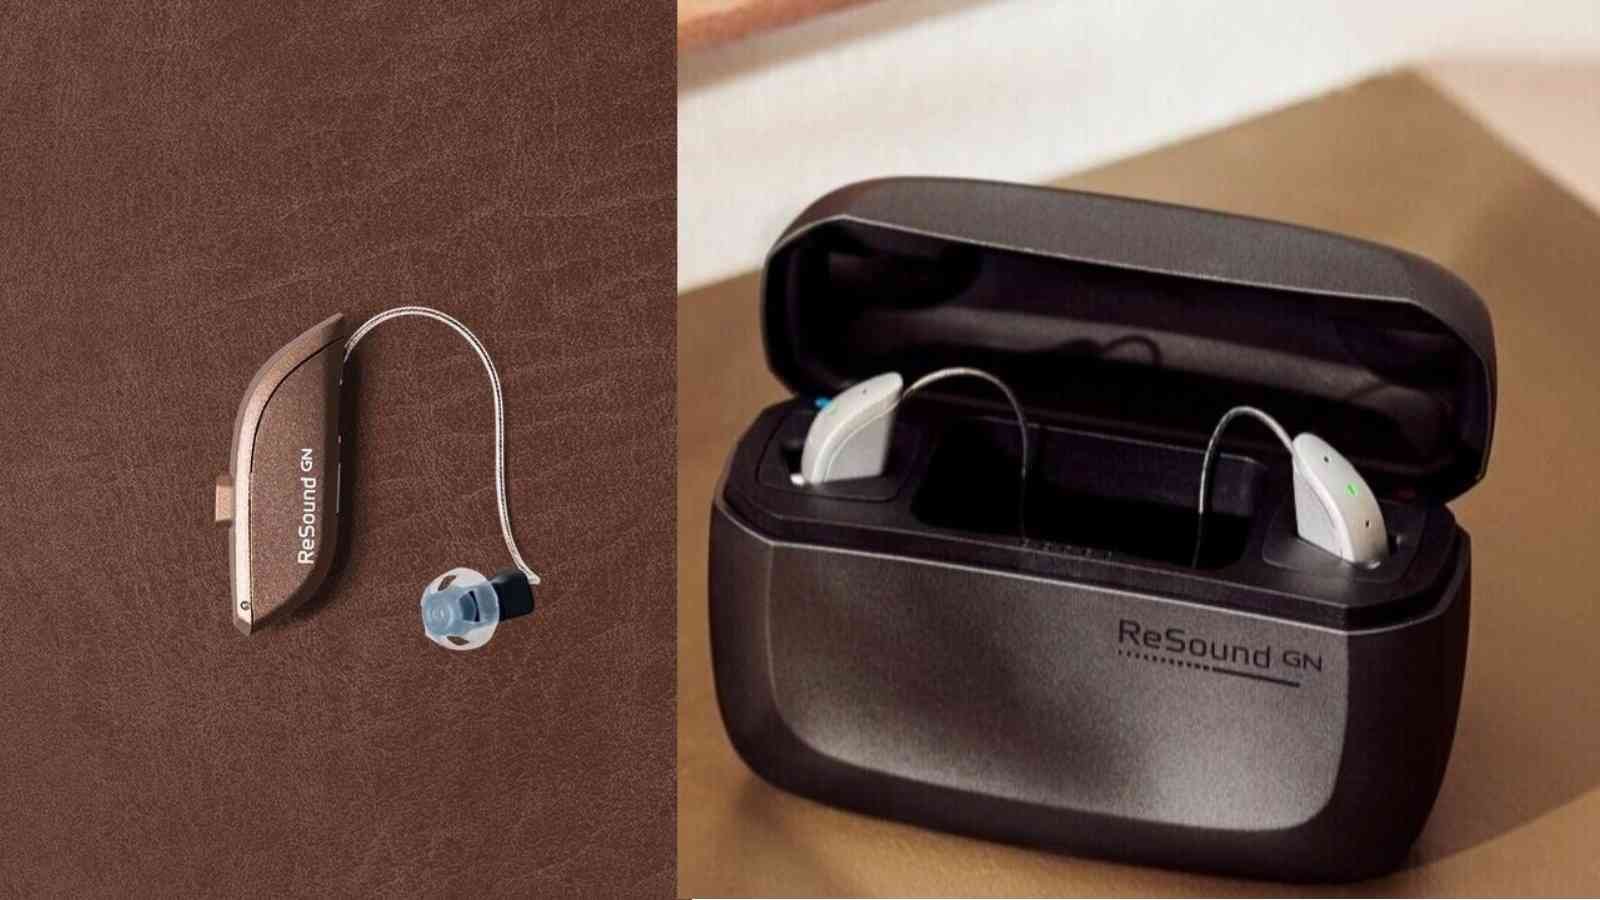 Image of the ReSound One hearing aid. The latest hearing aid in the ReSound family.